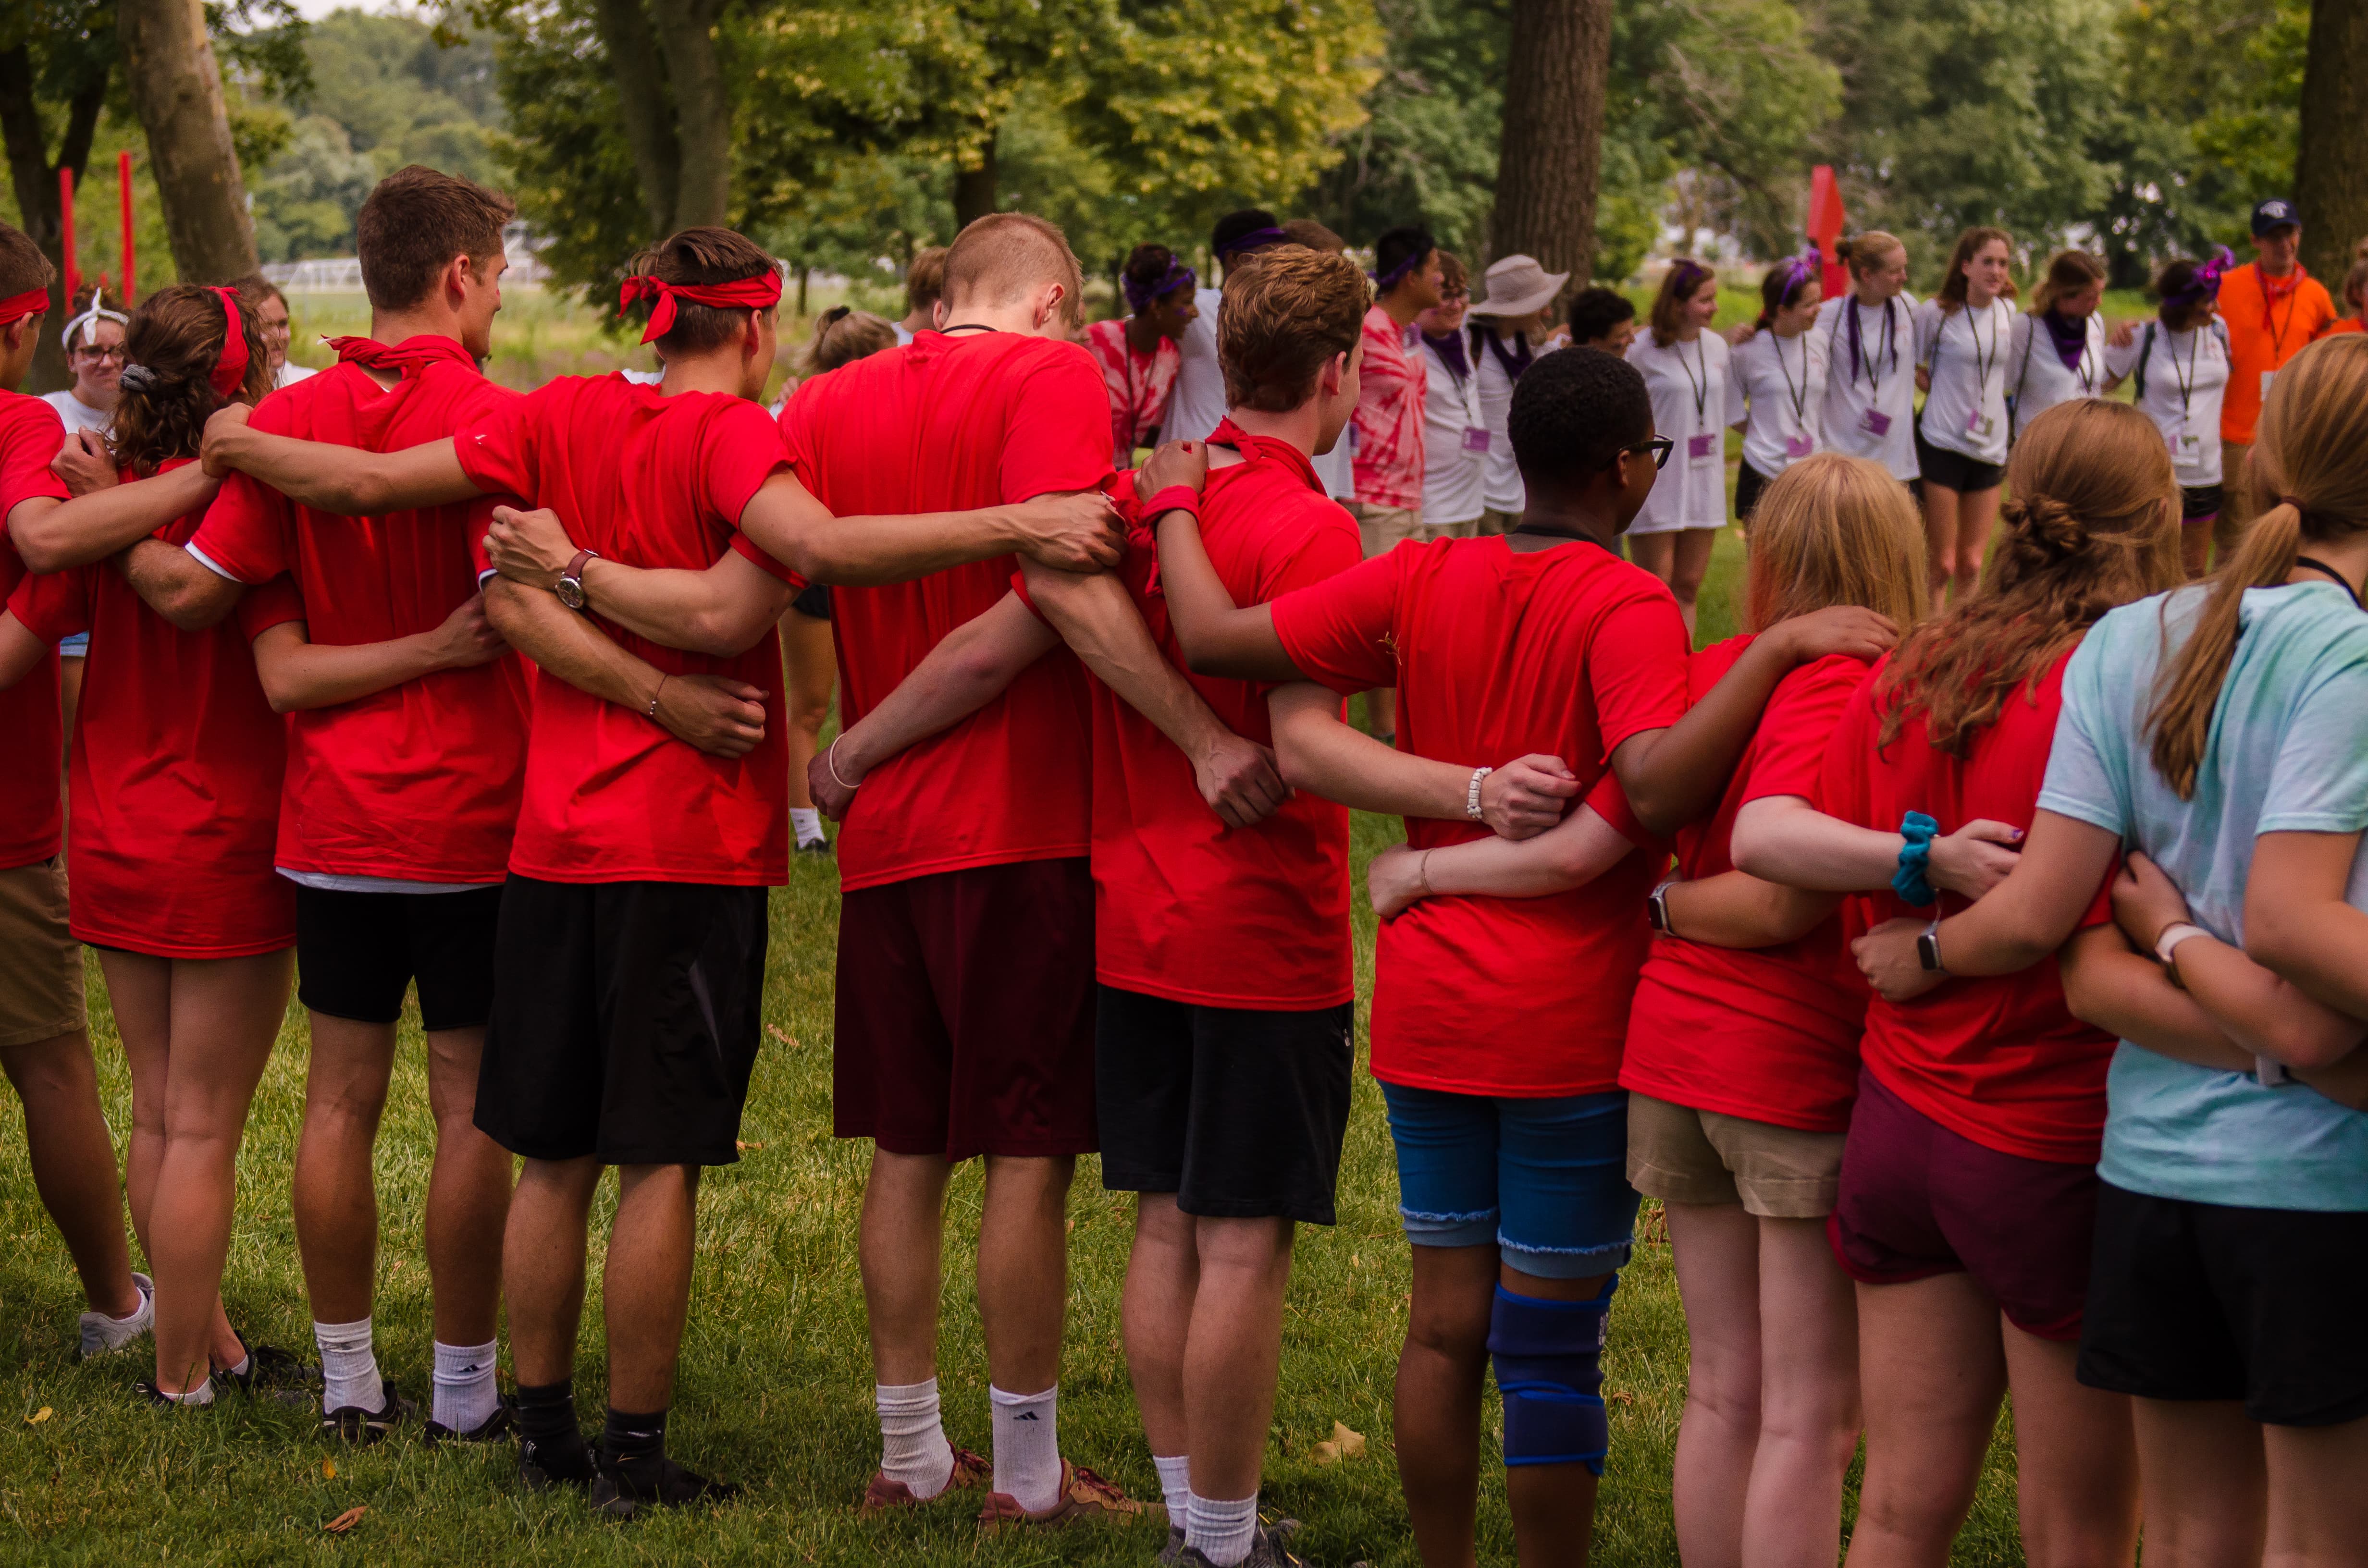 A group of students with their arms around one another at an outdoor student activity